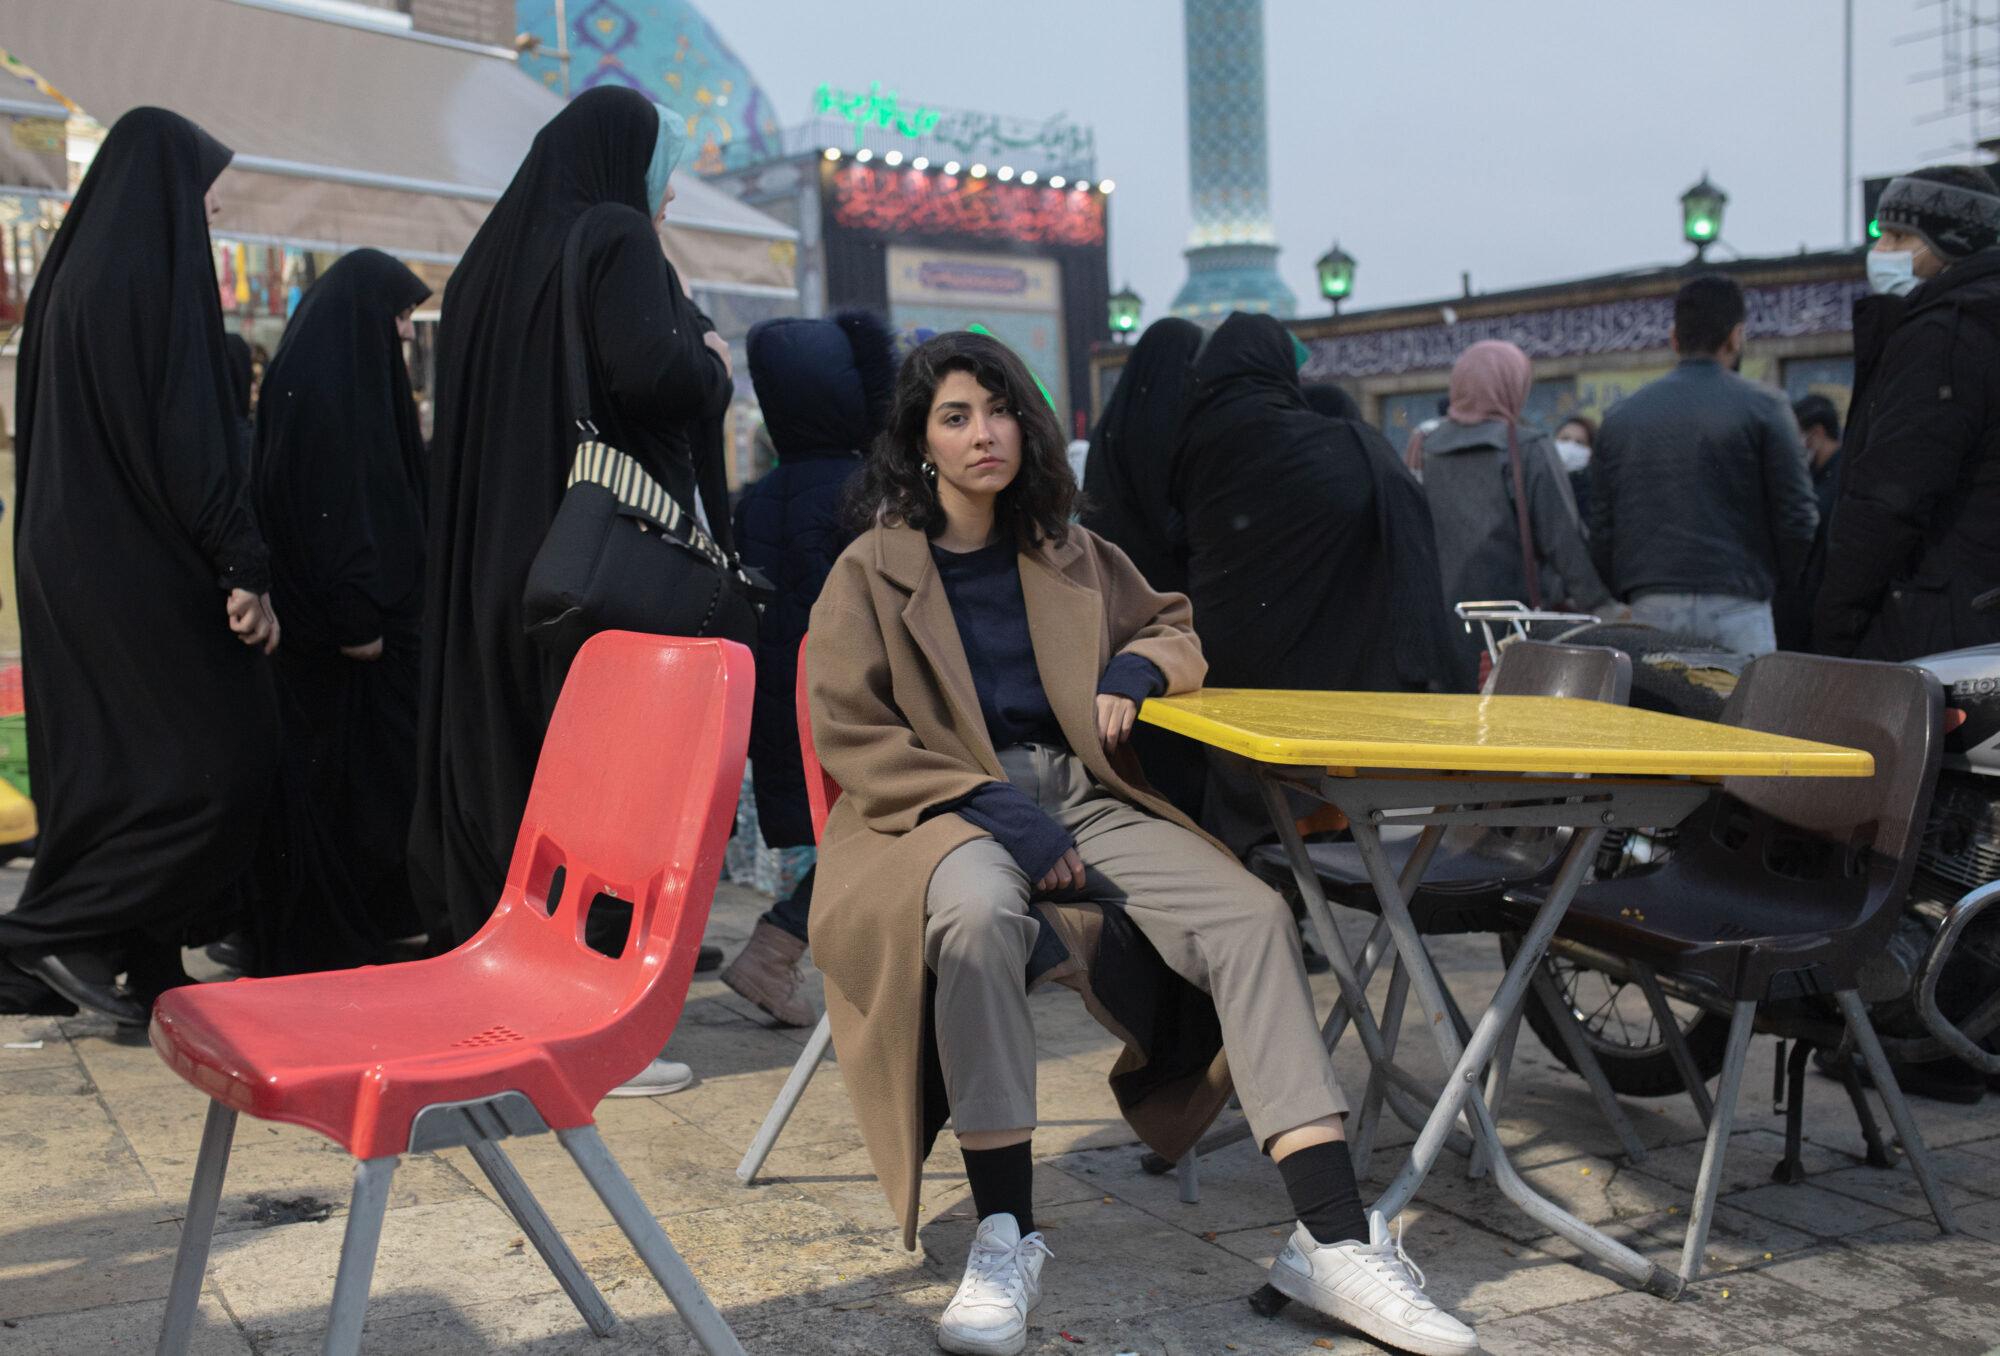 A young woman in front of a mosque on Keshavarz Boulevard in Tehran. The World Press Photo awarded this photo which symbolizes the courage of Iranian women since the beginning of the uprising. December 27, 2022. Photographer: Ahmadreza Halabisaz.